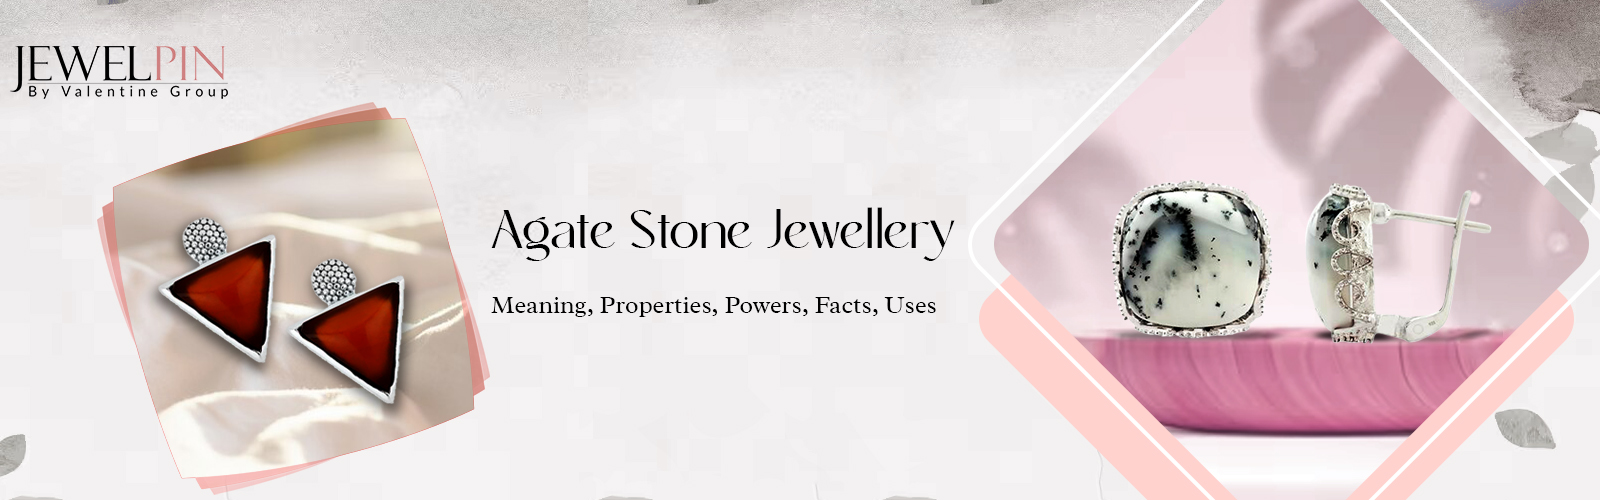 Agate Stone Jewellery - Meaning, Properties, Powers, Facts, Uses at jewelpin